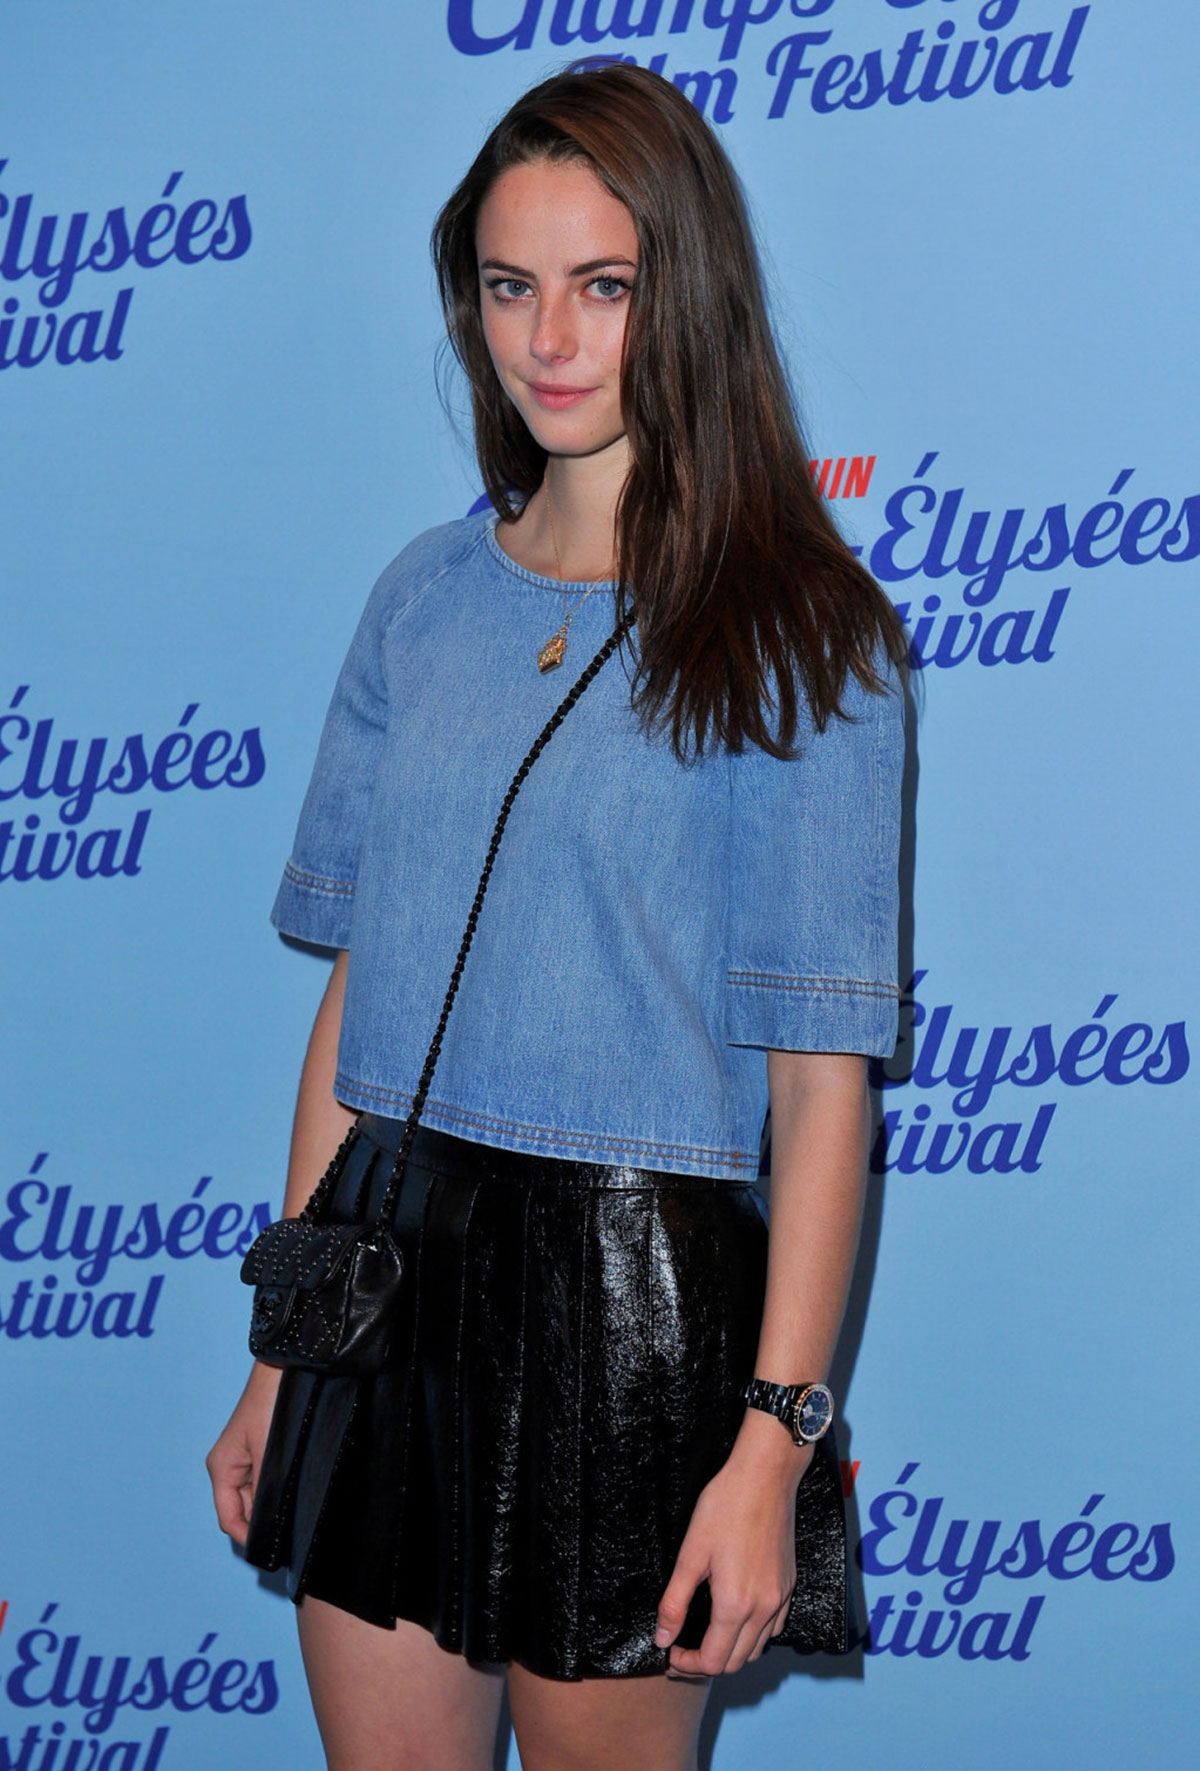 Kaya Scodelario attends The Truth About Emanuel Premiere